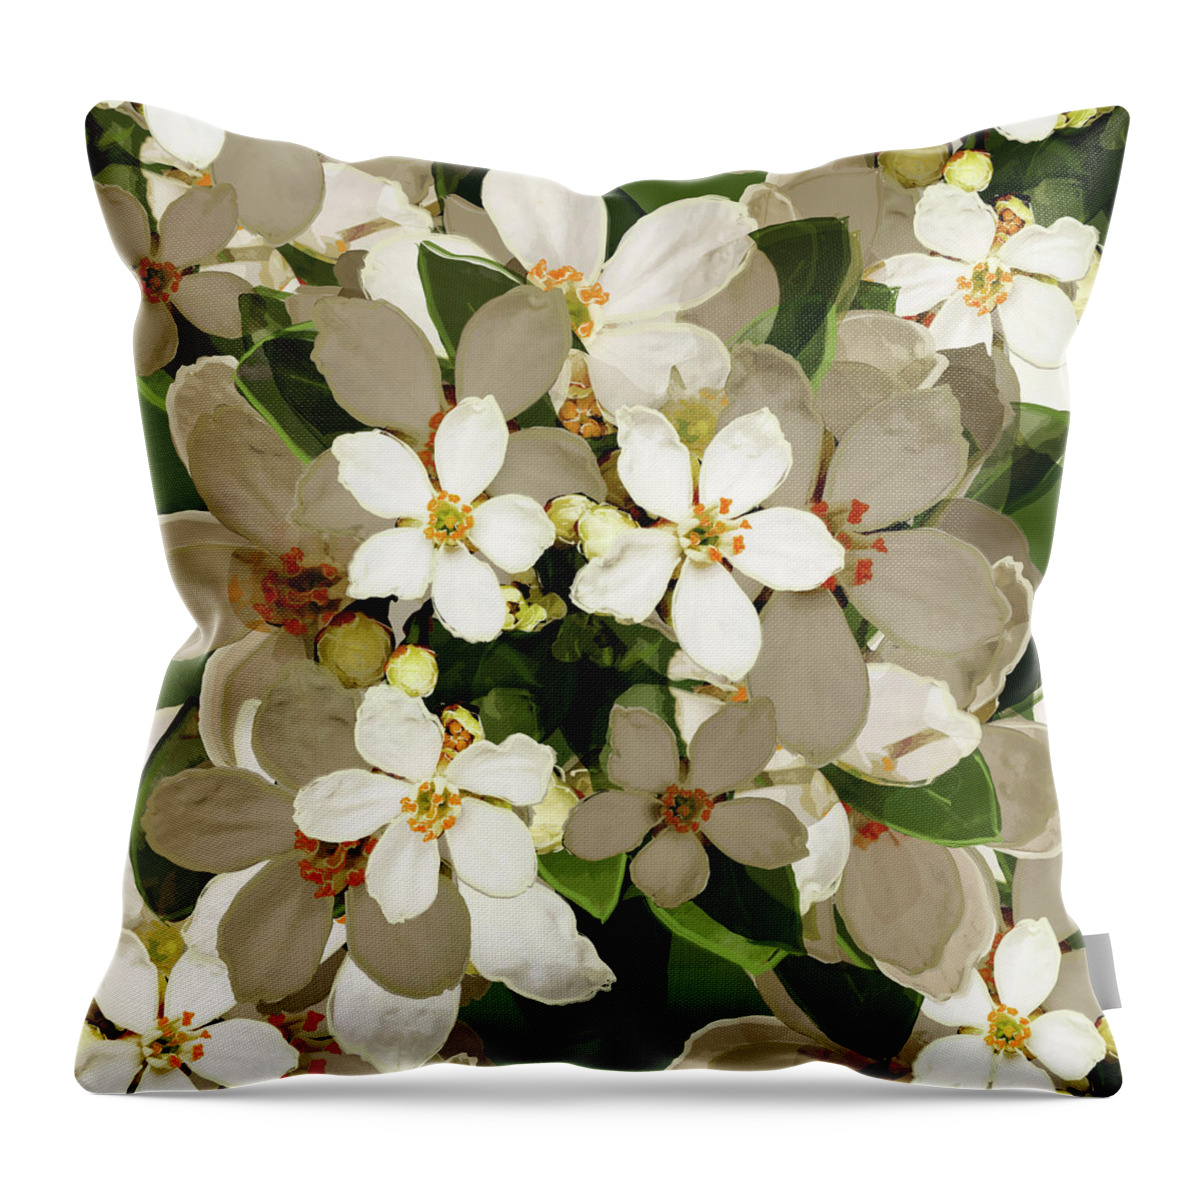 Daffodils Throw Pillow featuring the mixed media Blossom Flowers by Big Fat Arts